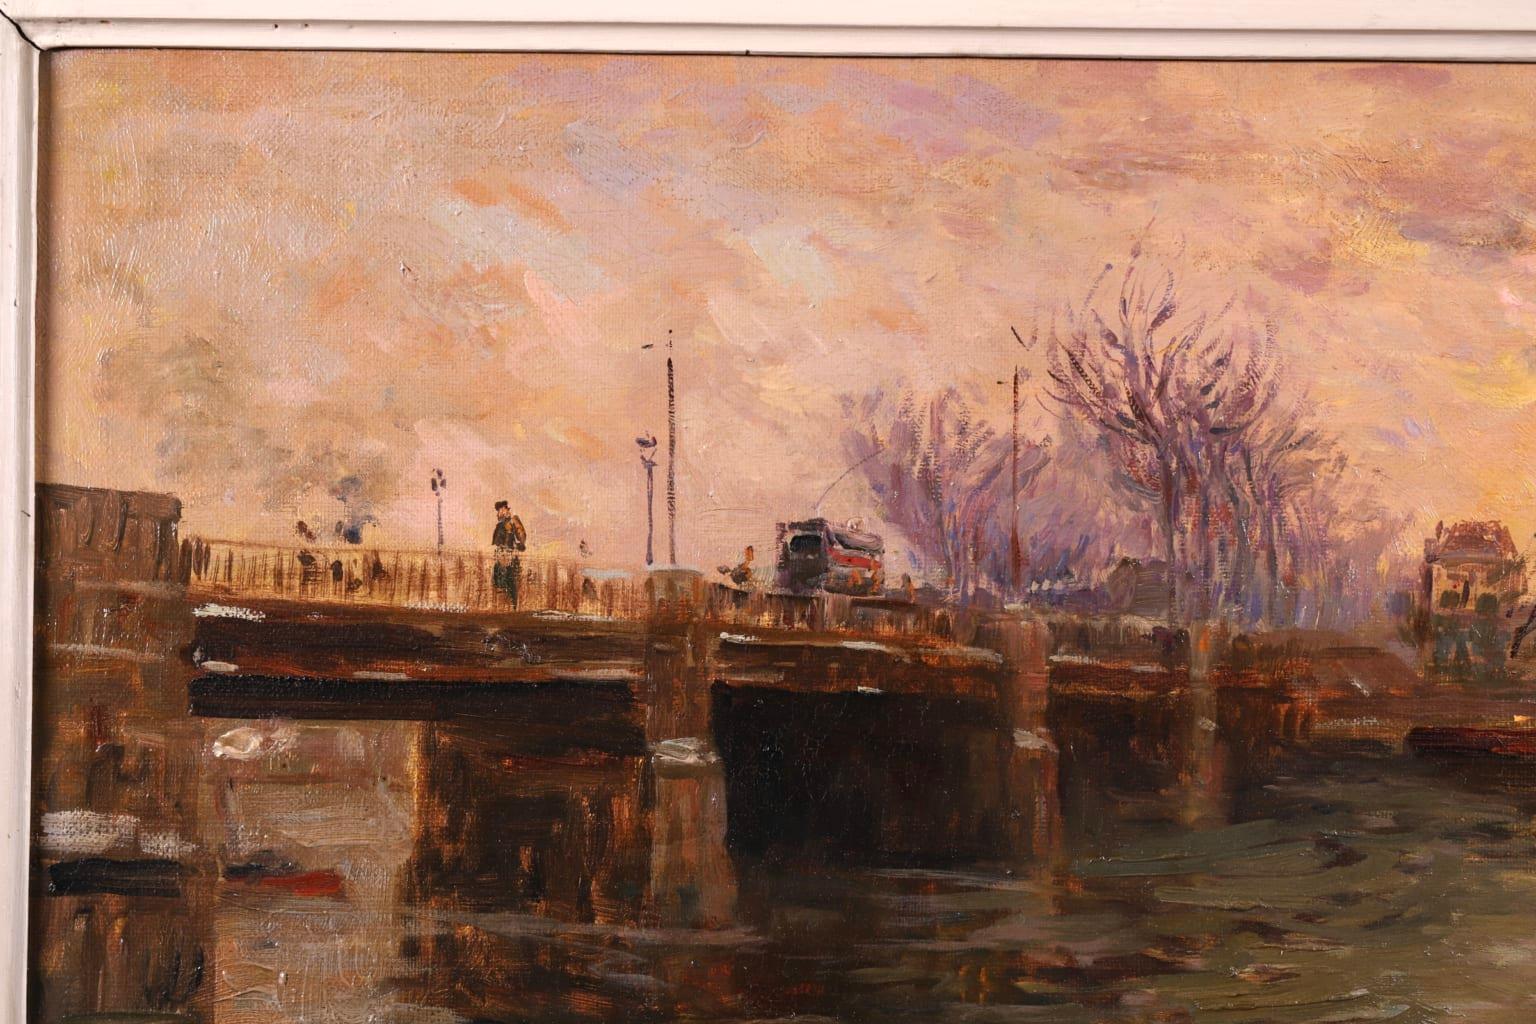 A simple and wonderful oil on canvas riverscape circa 1910 by Russian impressionist painter Elie Anatole Pavil. The work depicts a view of a bridge over the River Seine in France. The sunset illuminates the cloudy winter sky in yellows and peaches